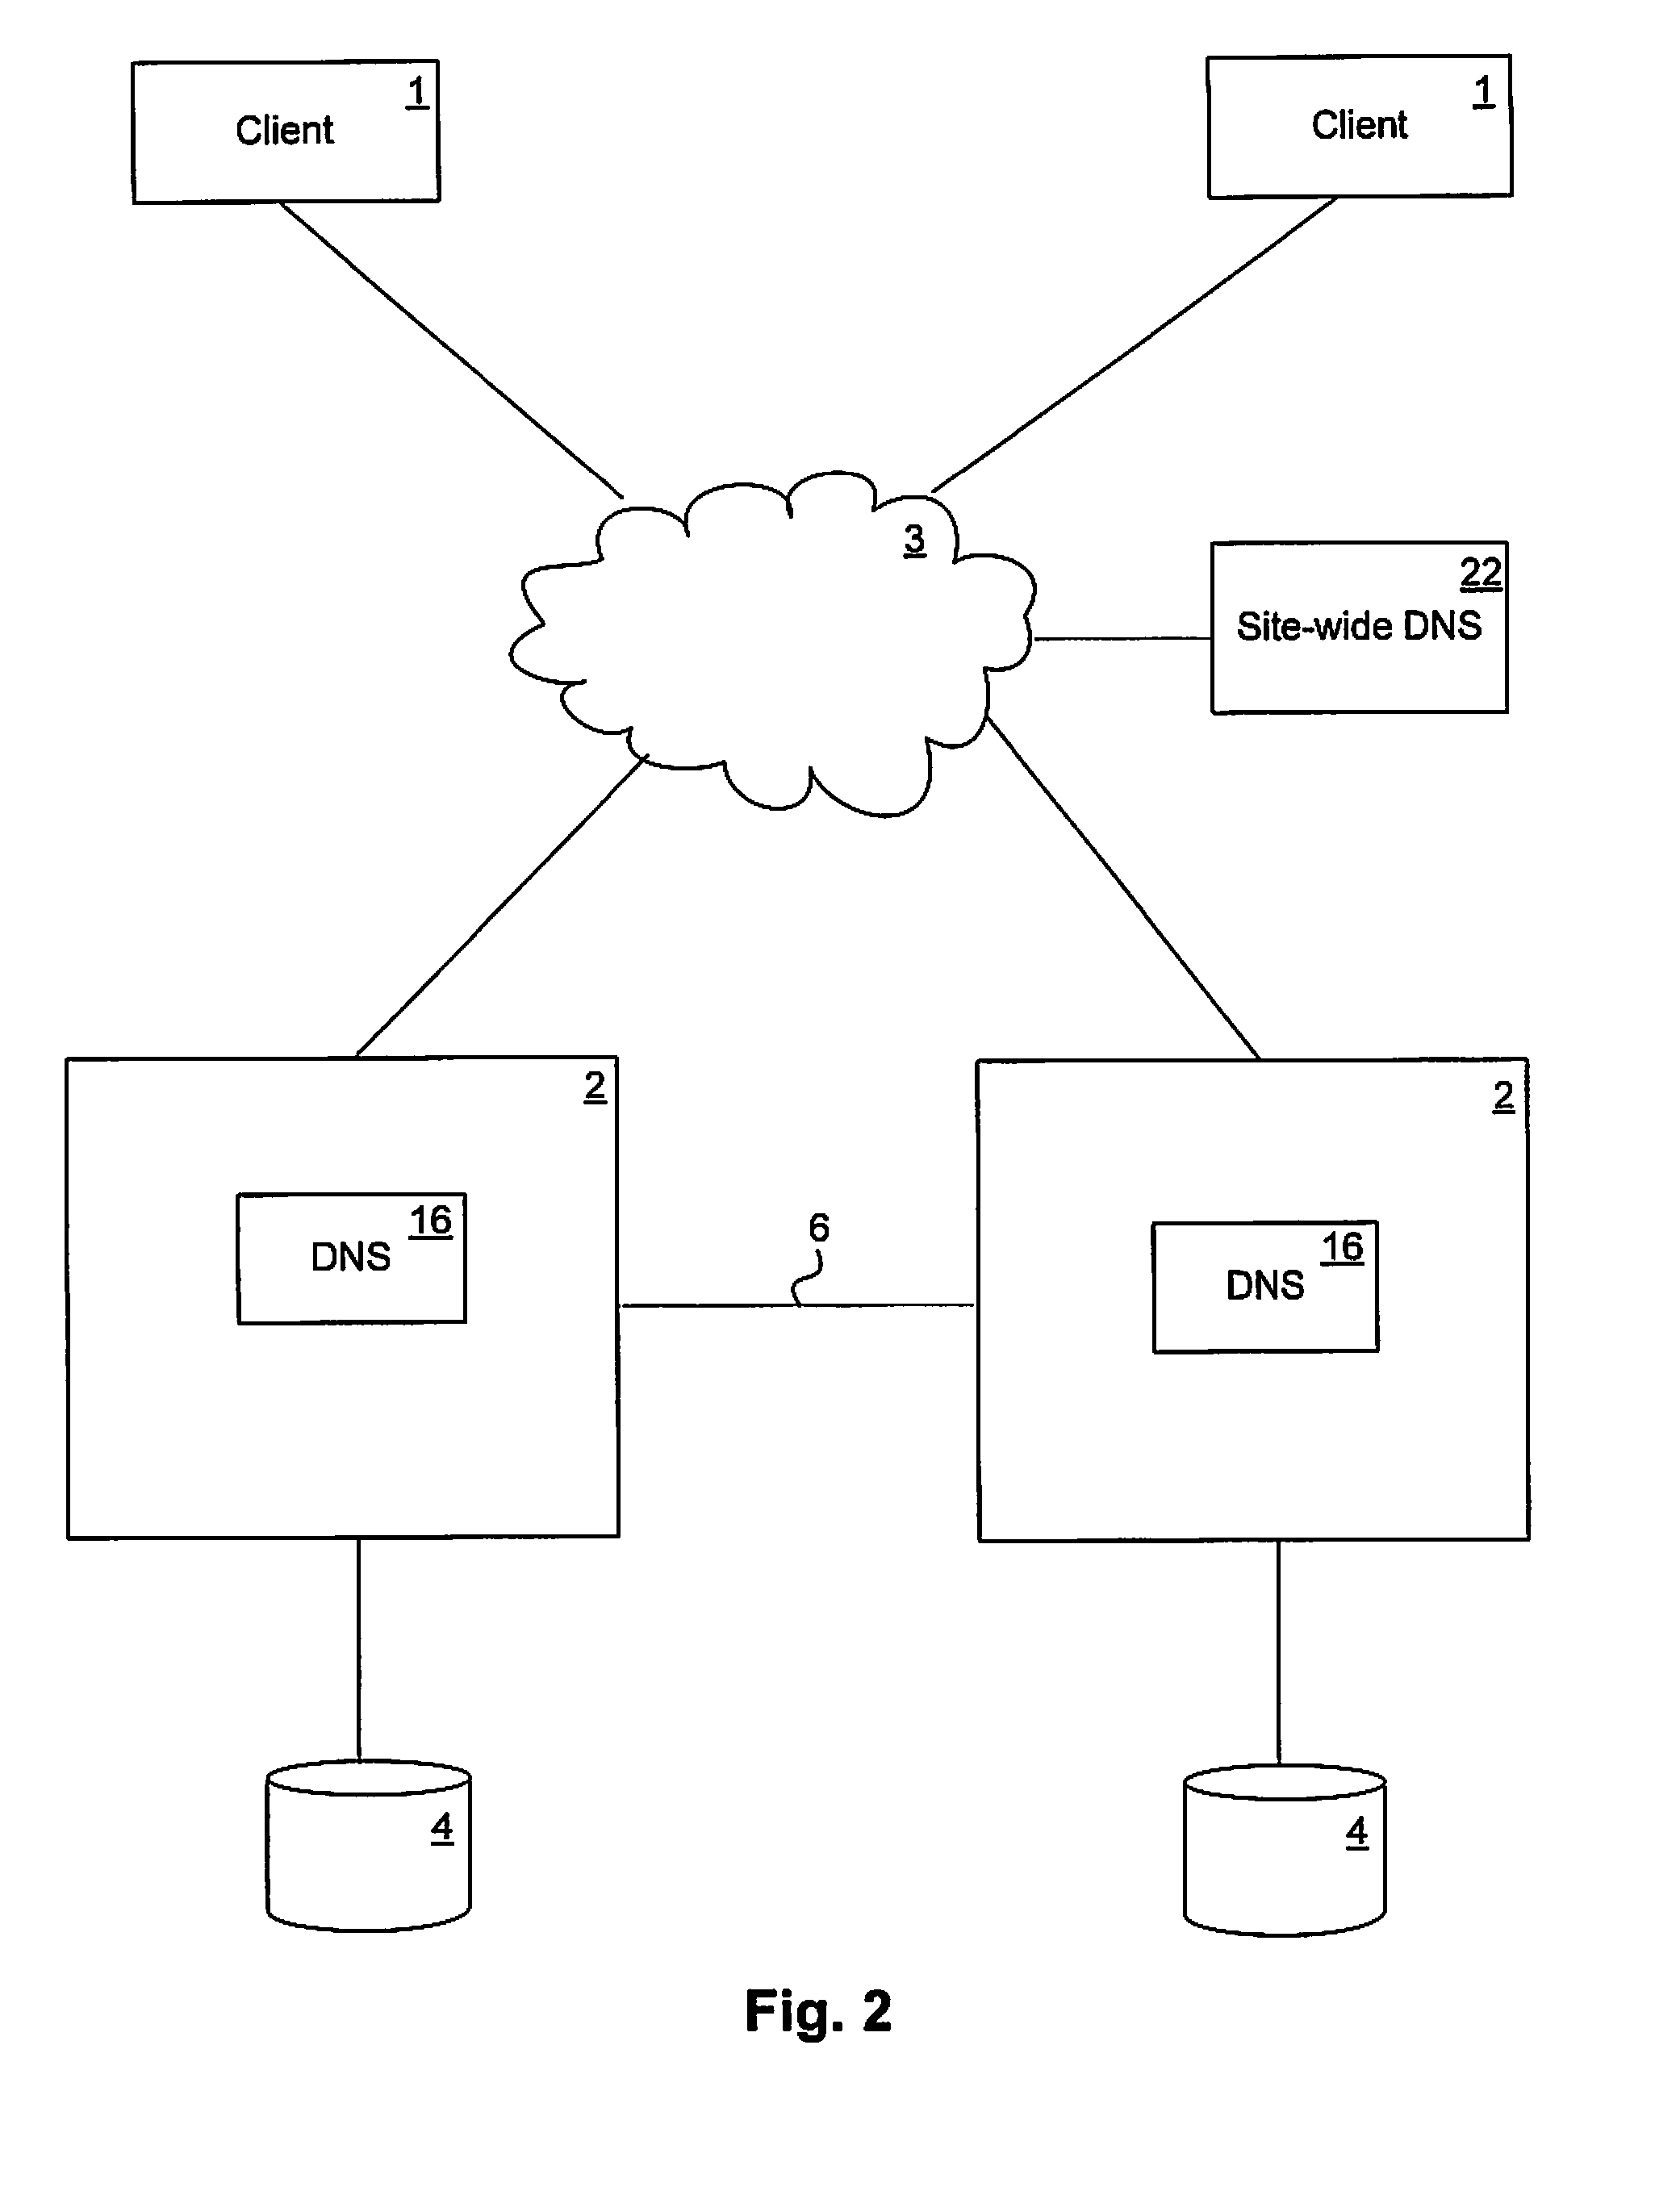 Load-derived probability-based domain name service in a network storage cluster